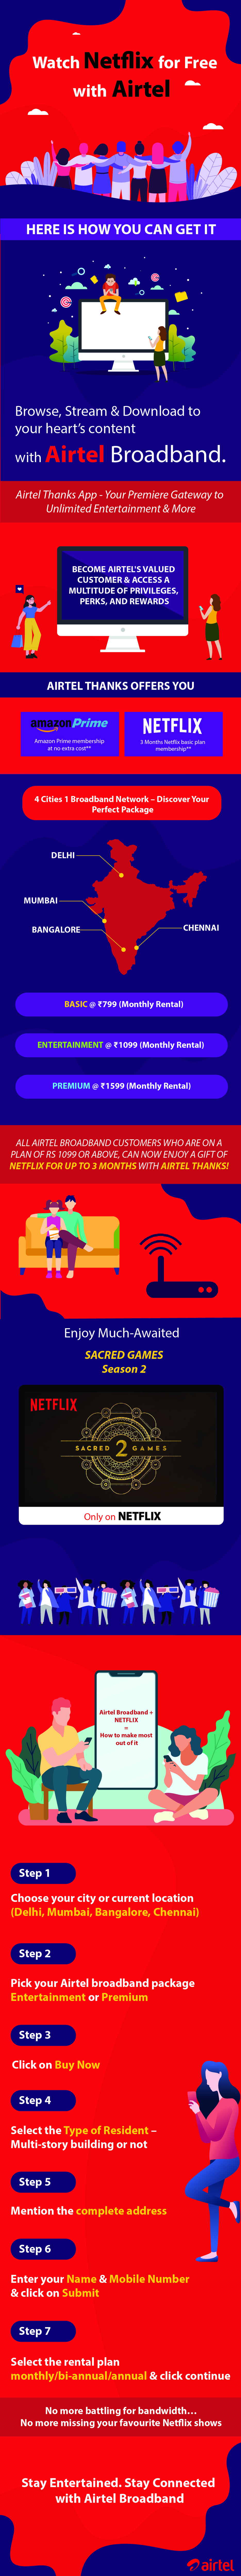 Airtel-IG-Watch Netflix for Free with Airtel